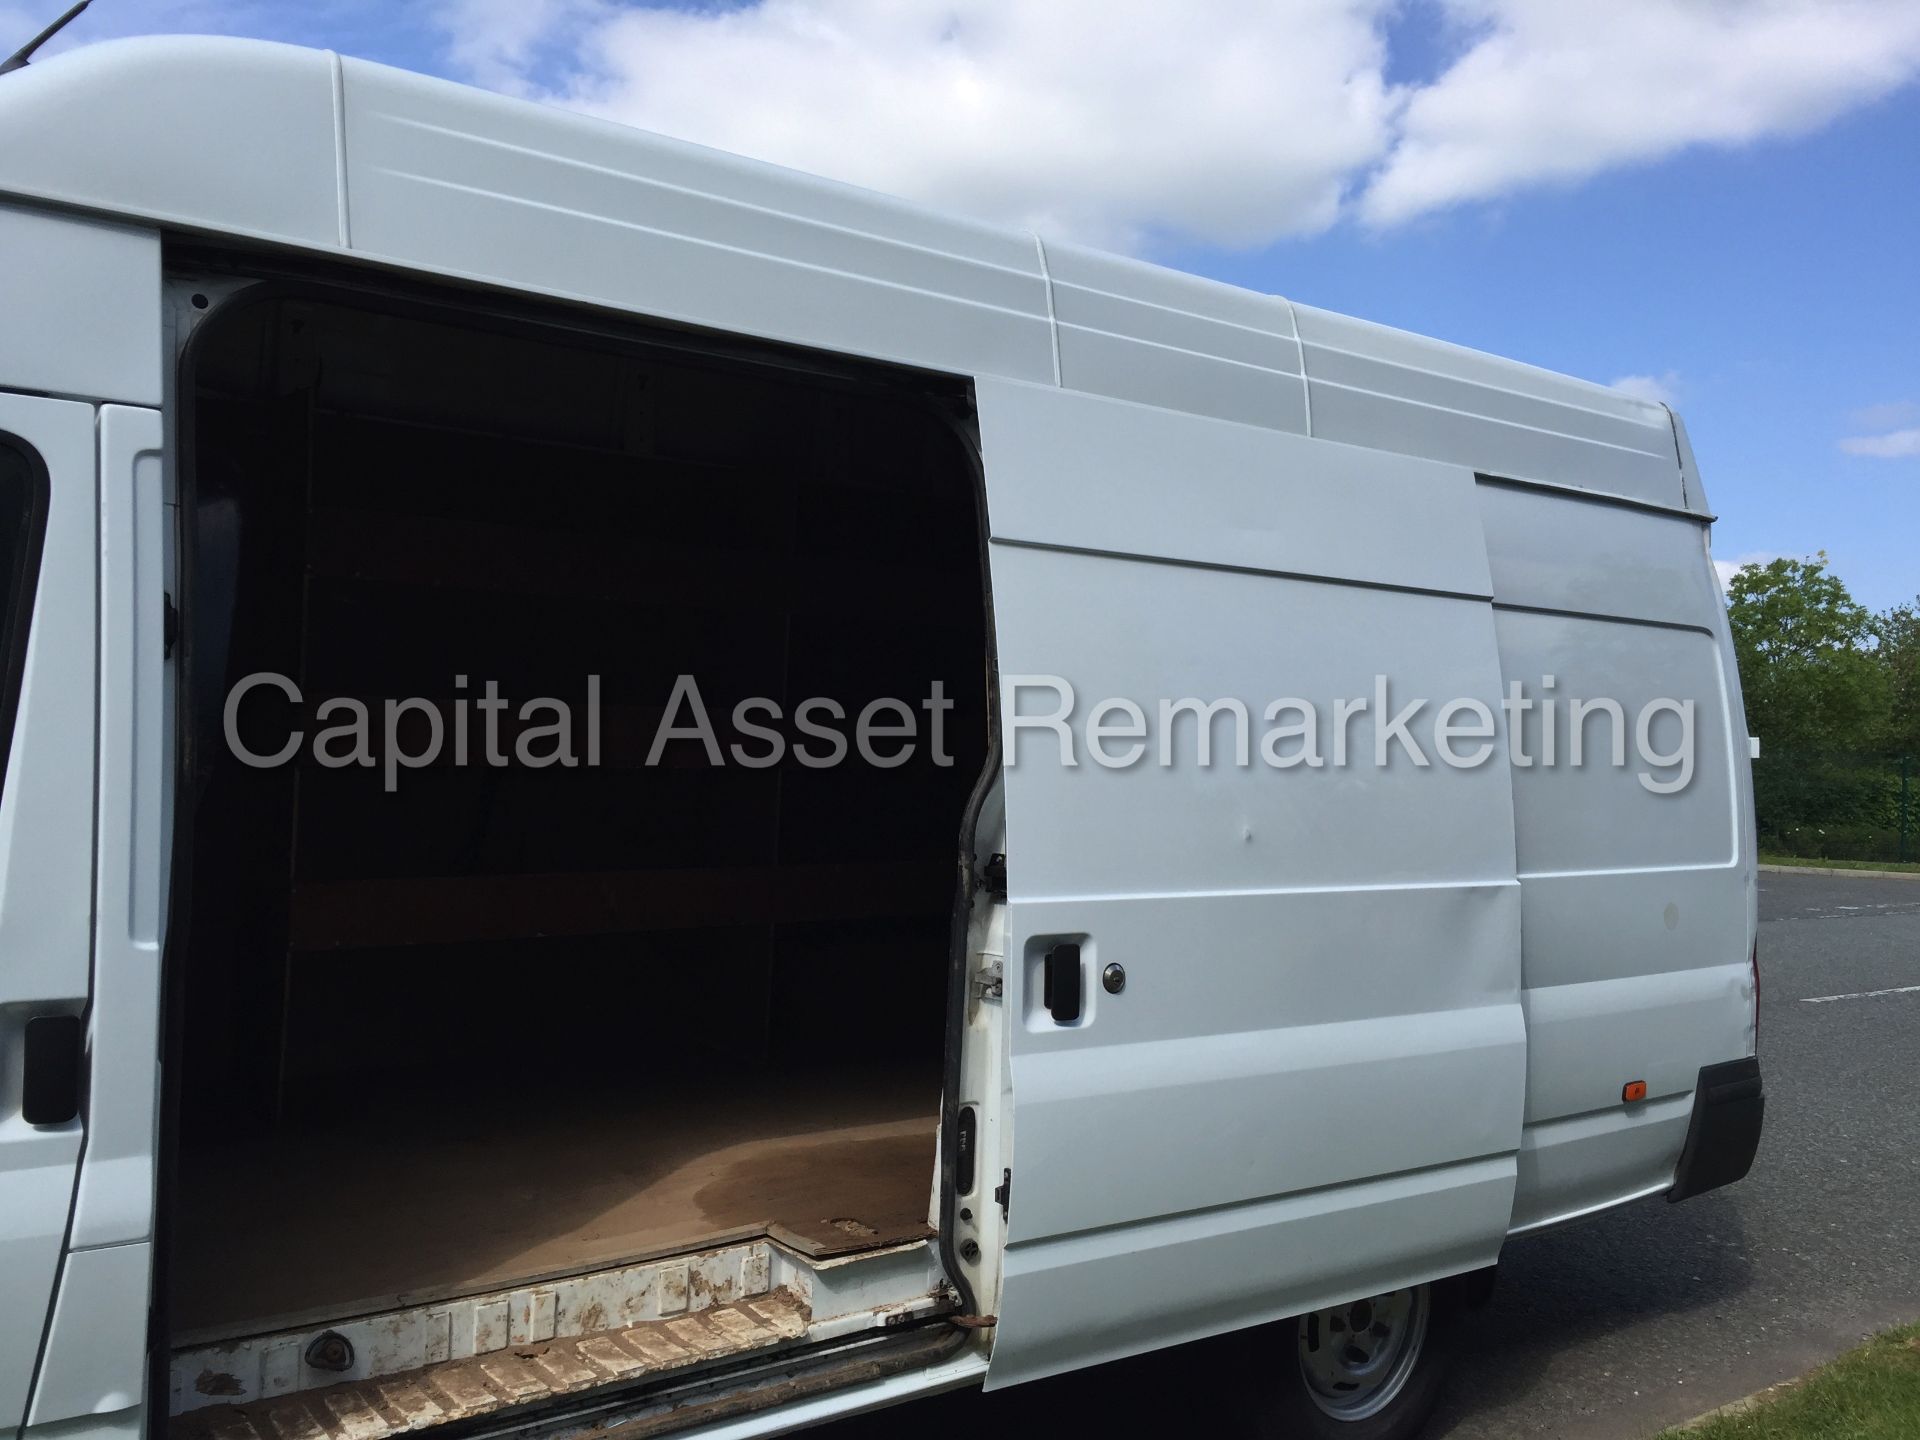 FORD TRANSIT 2.2TDCI - T350 - EXTRA LONG WHEEL BASE "JUMBO" - 12 REG - 1 OWNER FROM NEW - LOW MILES! - Image 14 of 18